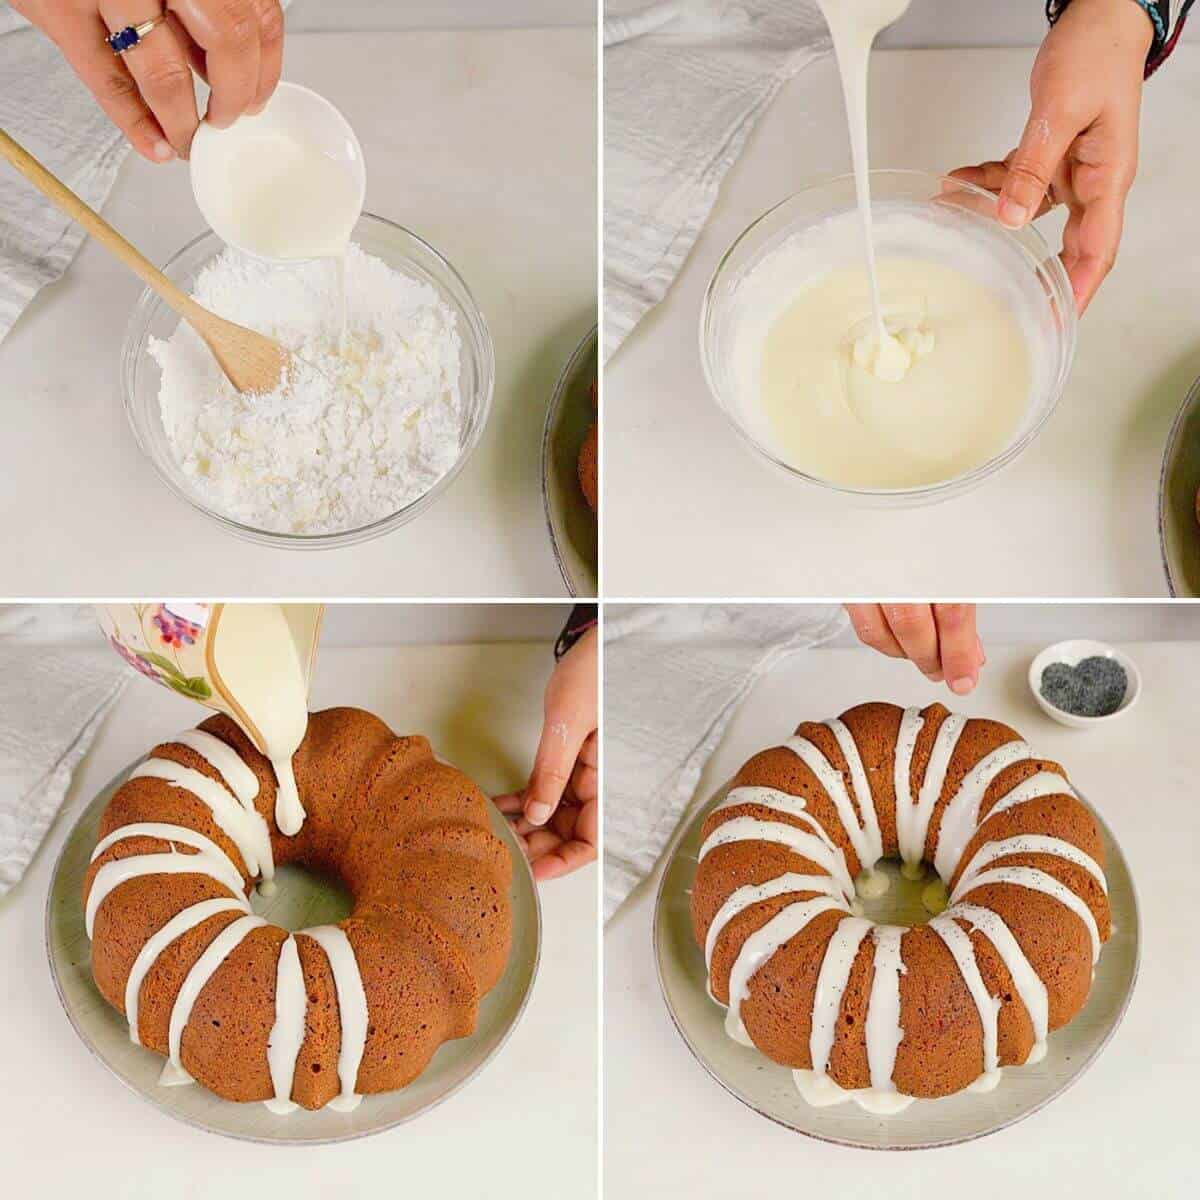 Making glaze to drizzle on the cake.